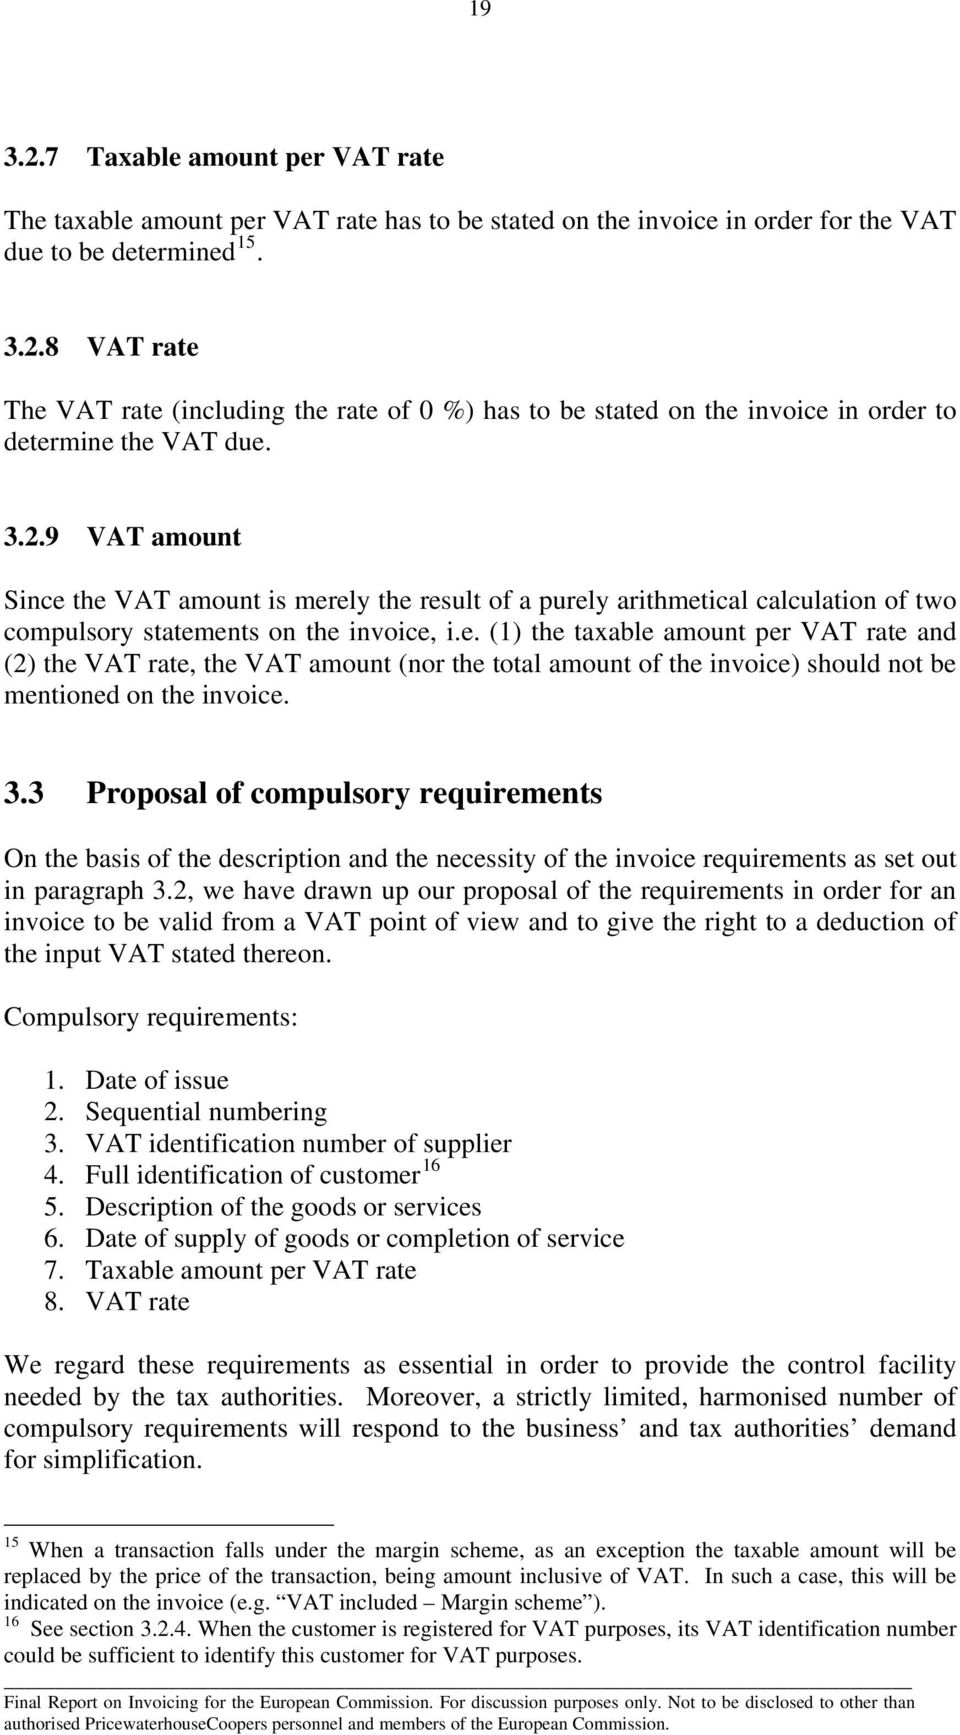 3.3 Proposal of compulsory requirements On the basis of the description and the necessity of the invoice requirements as set out in paragraph 3.